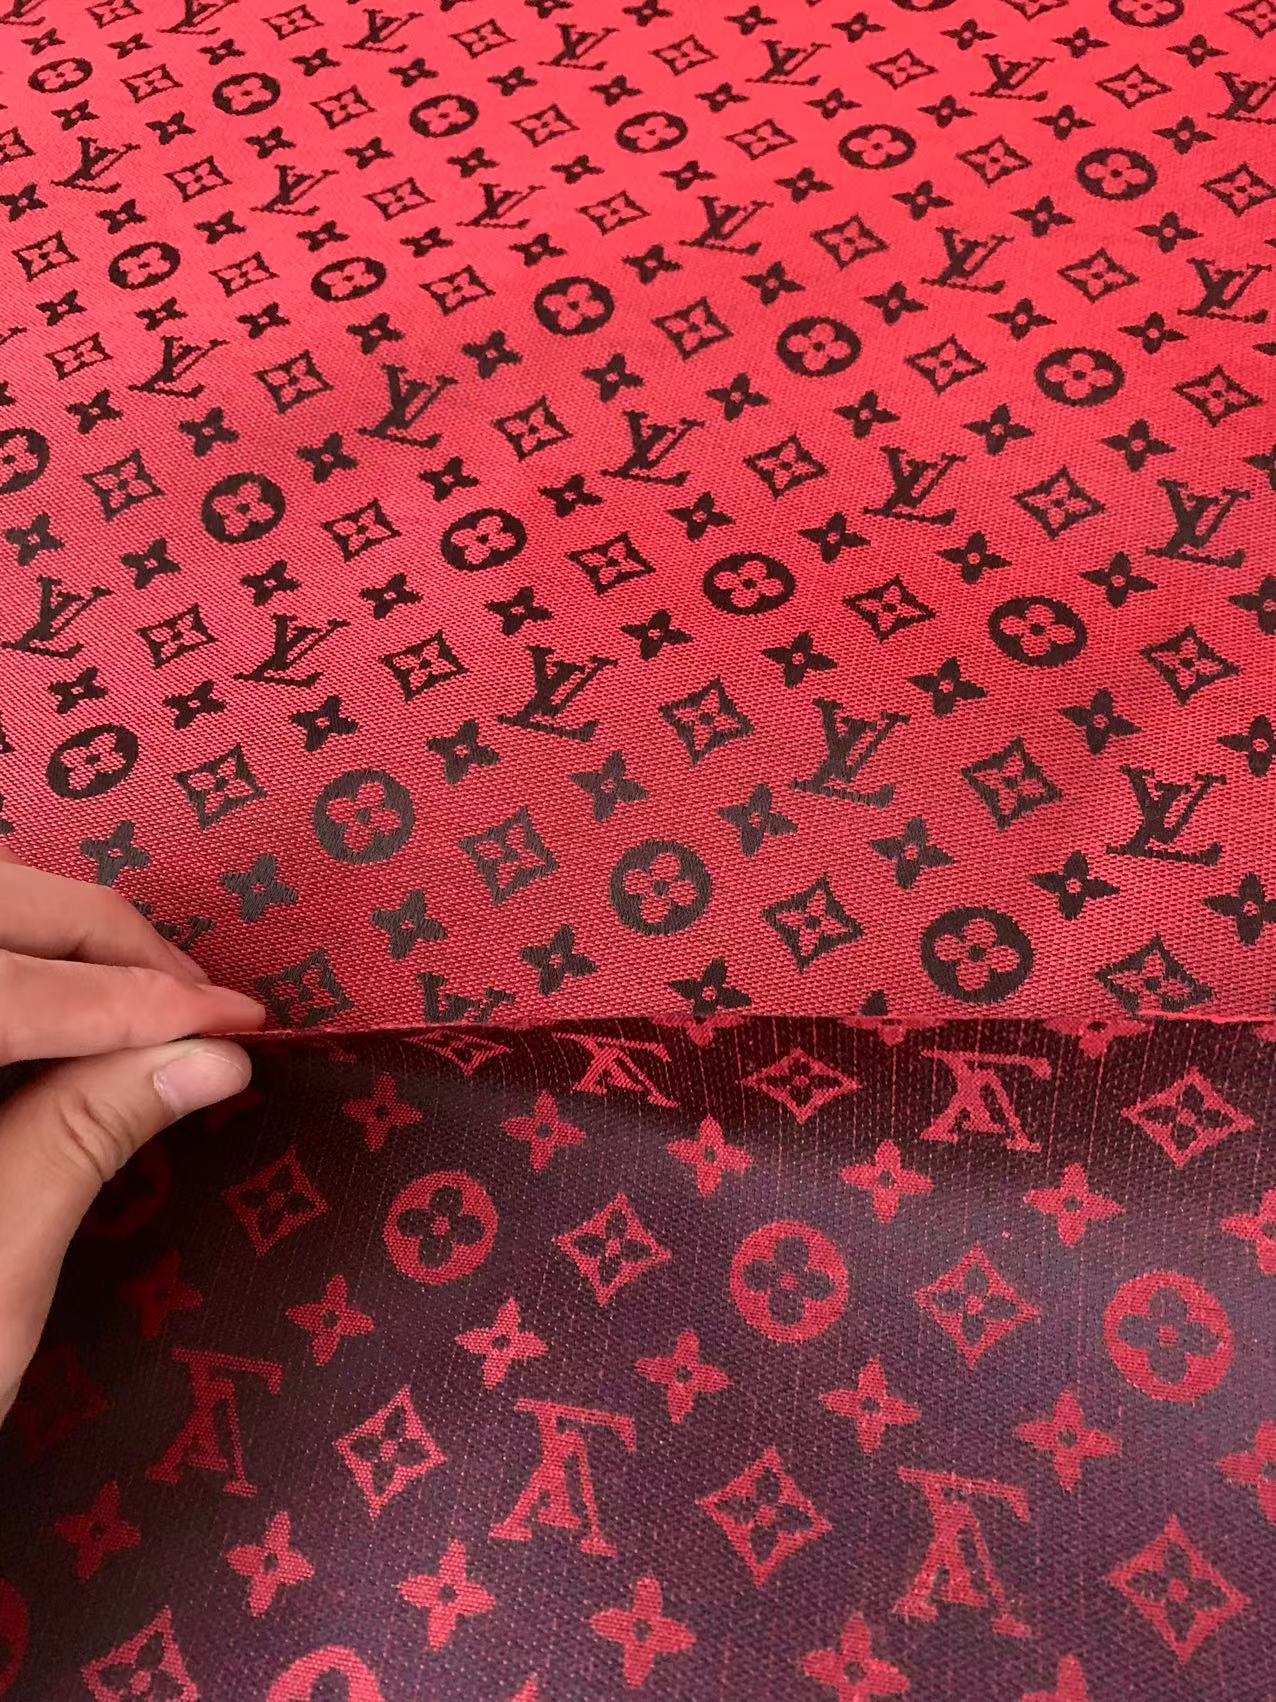 Fashion Red LV Jacquard Cloth Fabric For Handmade Sneaker,Upholstery And Apparel